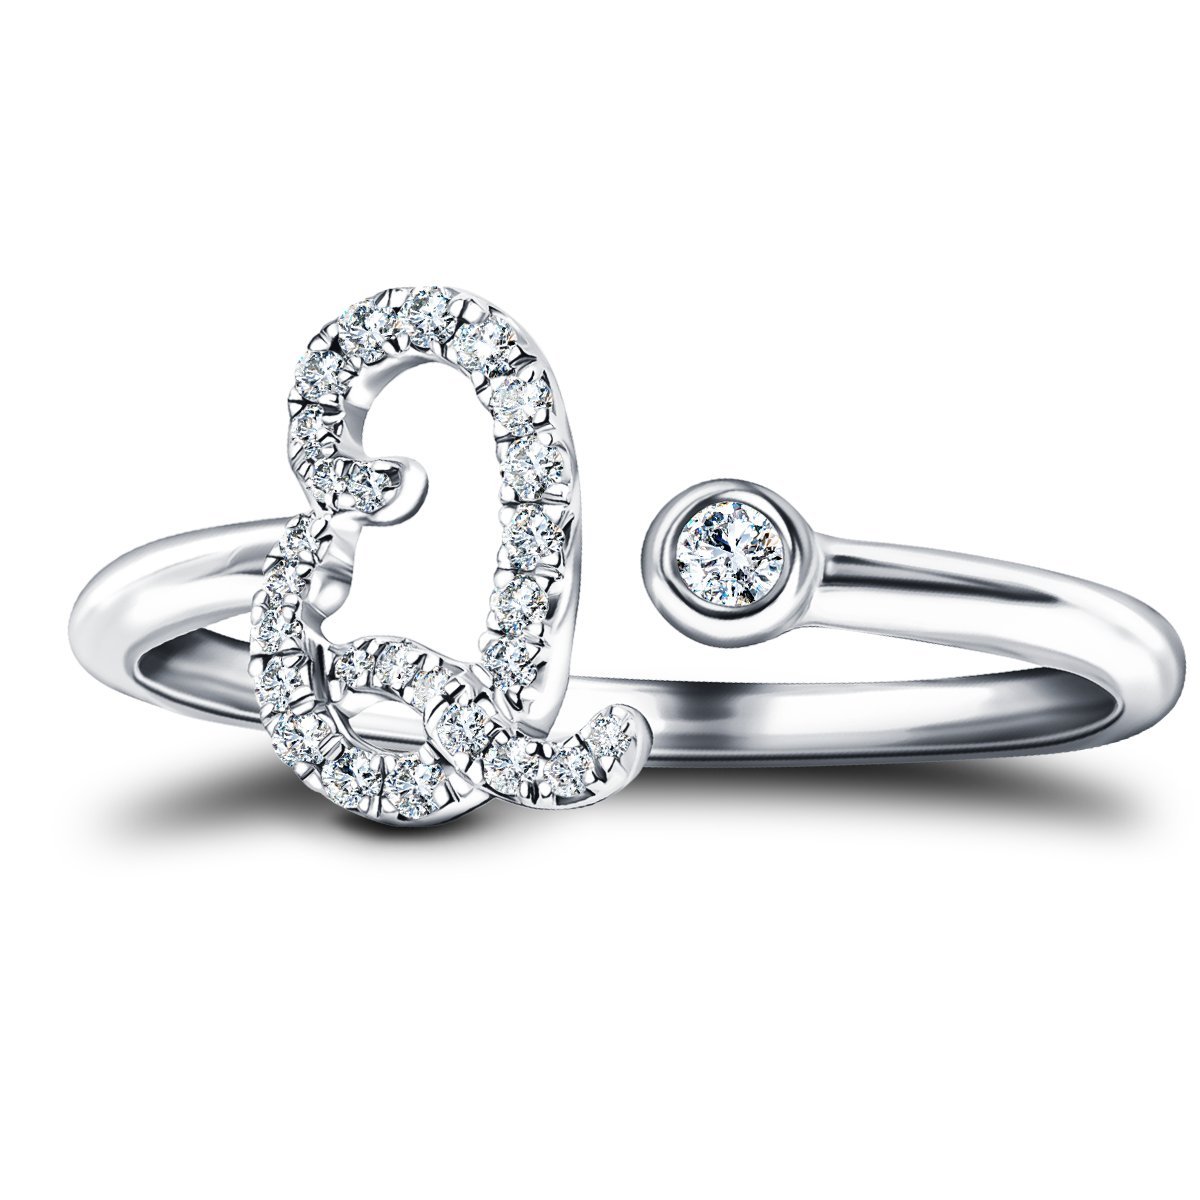 Fancy Diamond Initial 'Q' Ring 0.12ct G/SI Quality in 9k White Gold - All Diamond